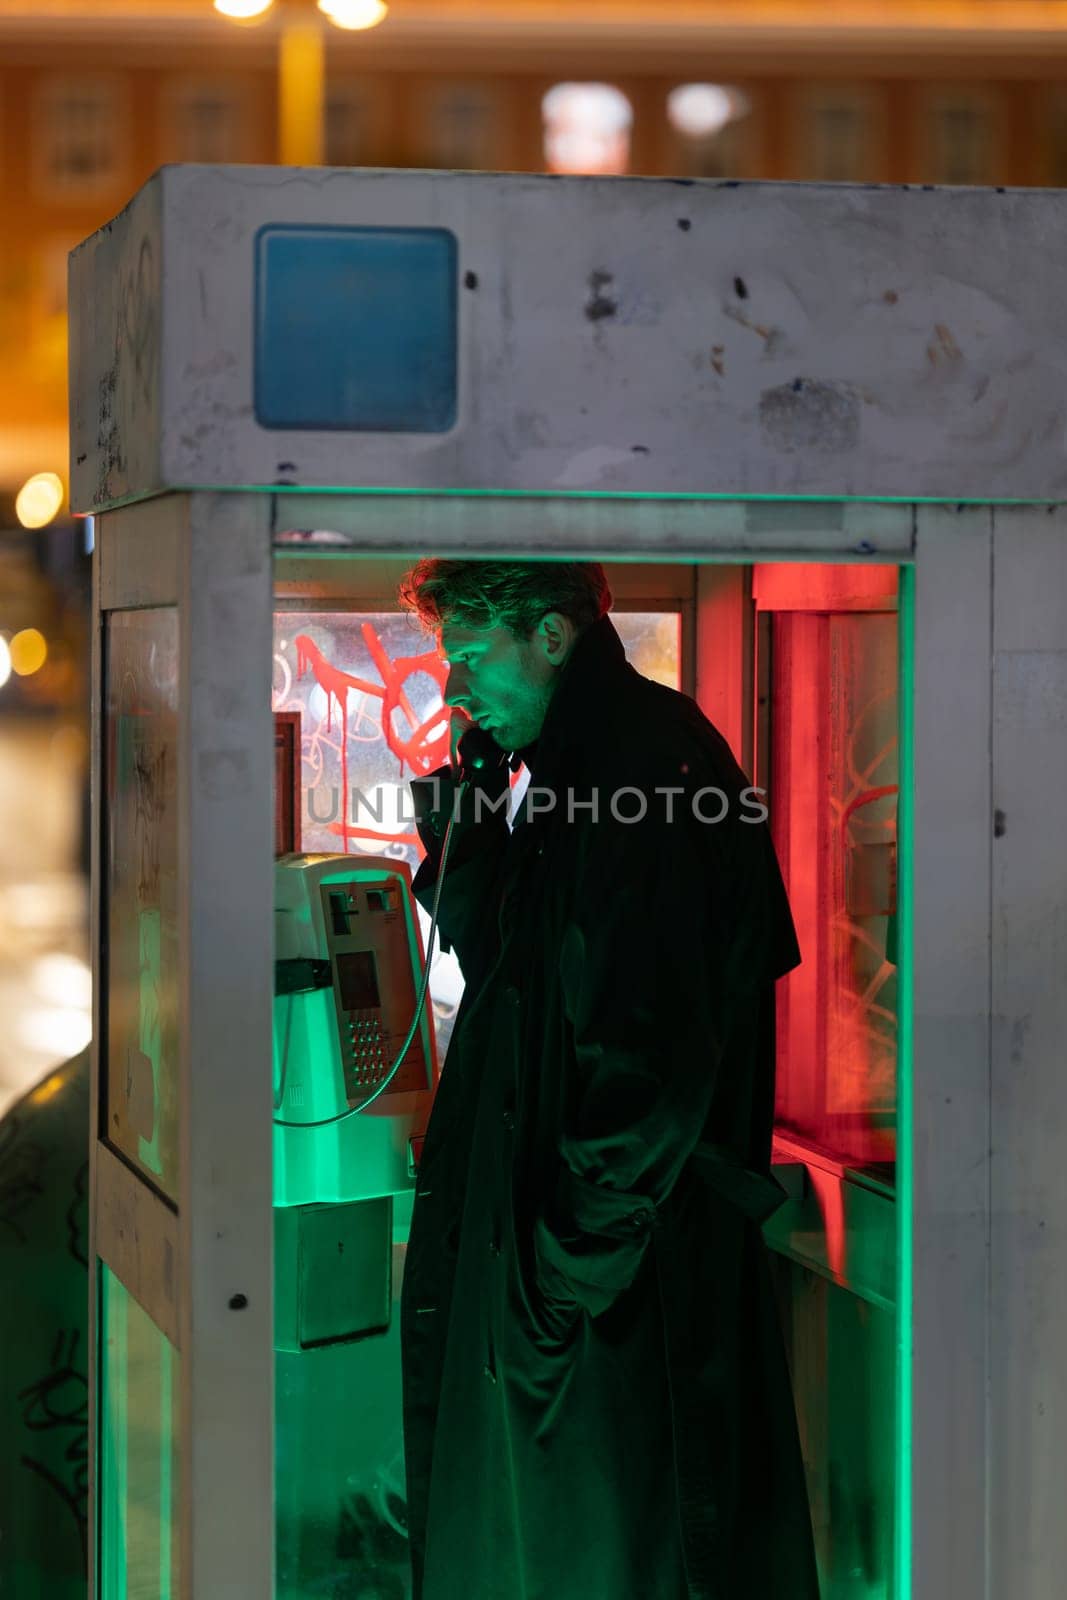 A man is talking on a phone in a booth. The booth is in a dimly lit area